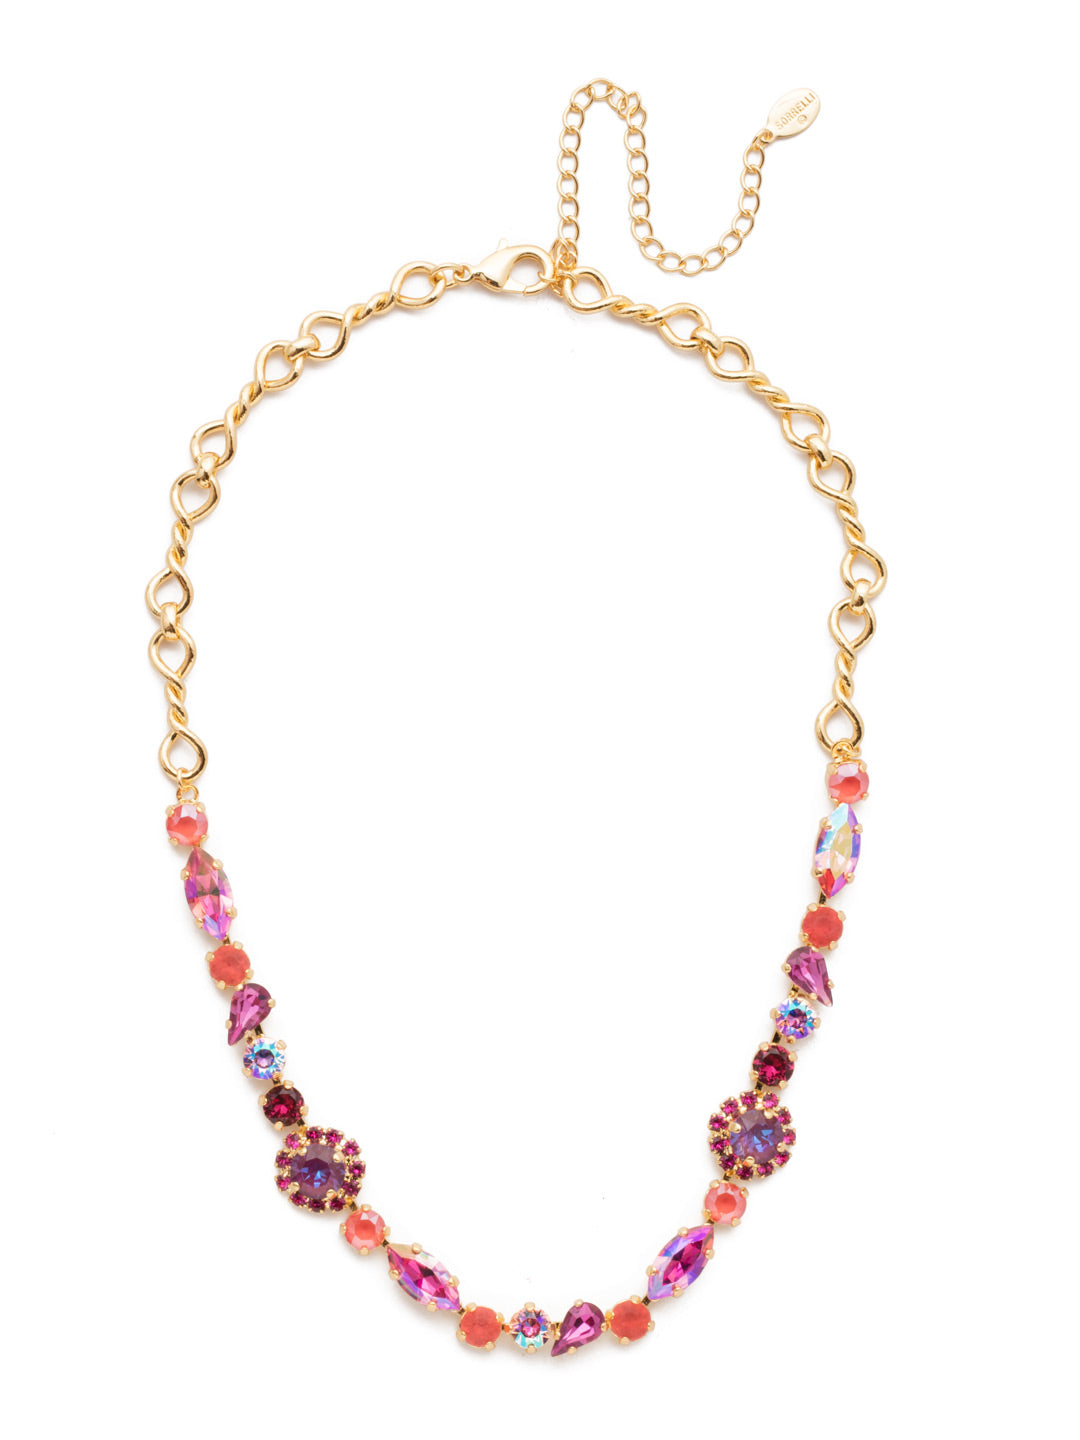 Nova Tennis Necklace - NES9BGBGA - The Nova Tennis Necklace shines bright with hand-molded metalwork giving way to sparkling crystals galore in cushion, round, marquise and navette shapes. From Sorrelli's Begonia collection in our Bright Gold-tone finish.